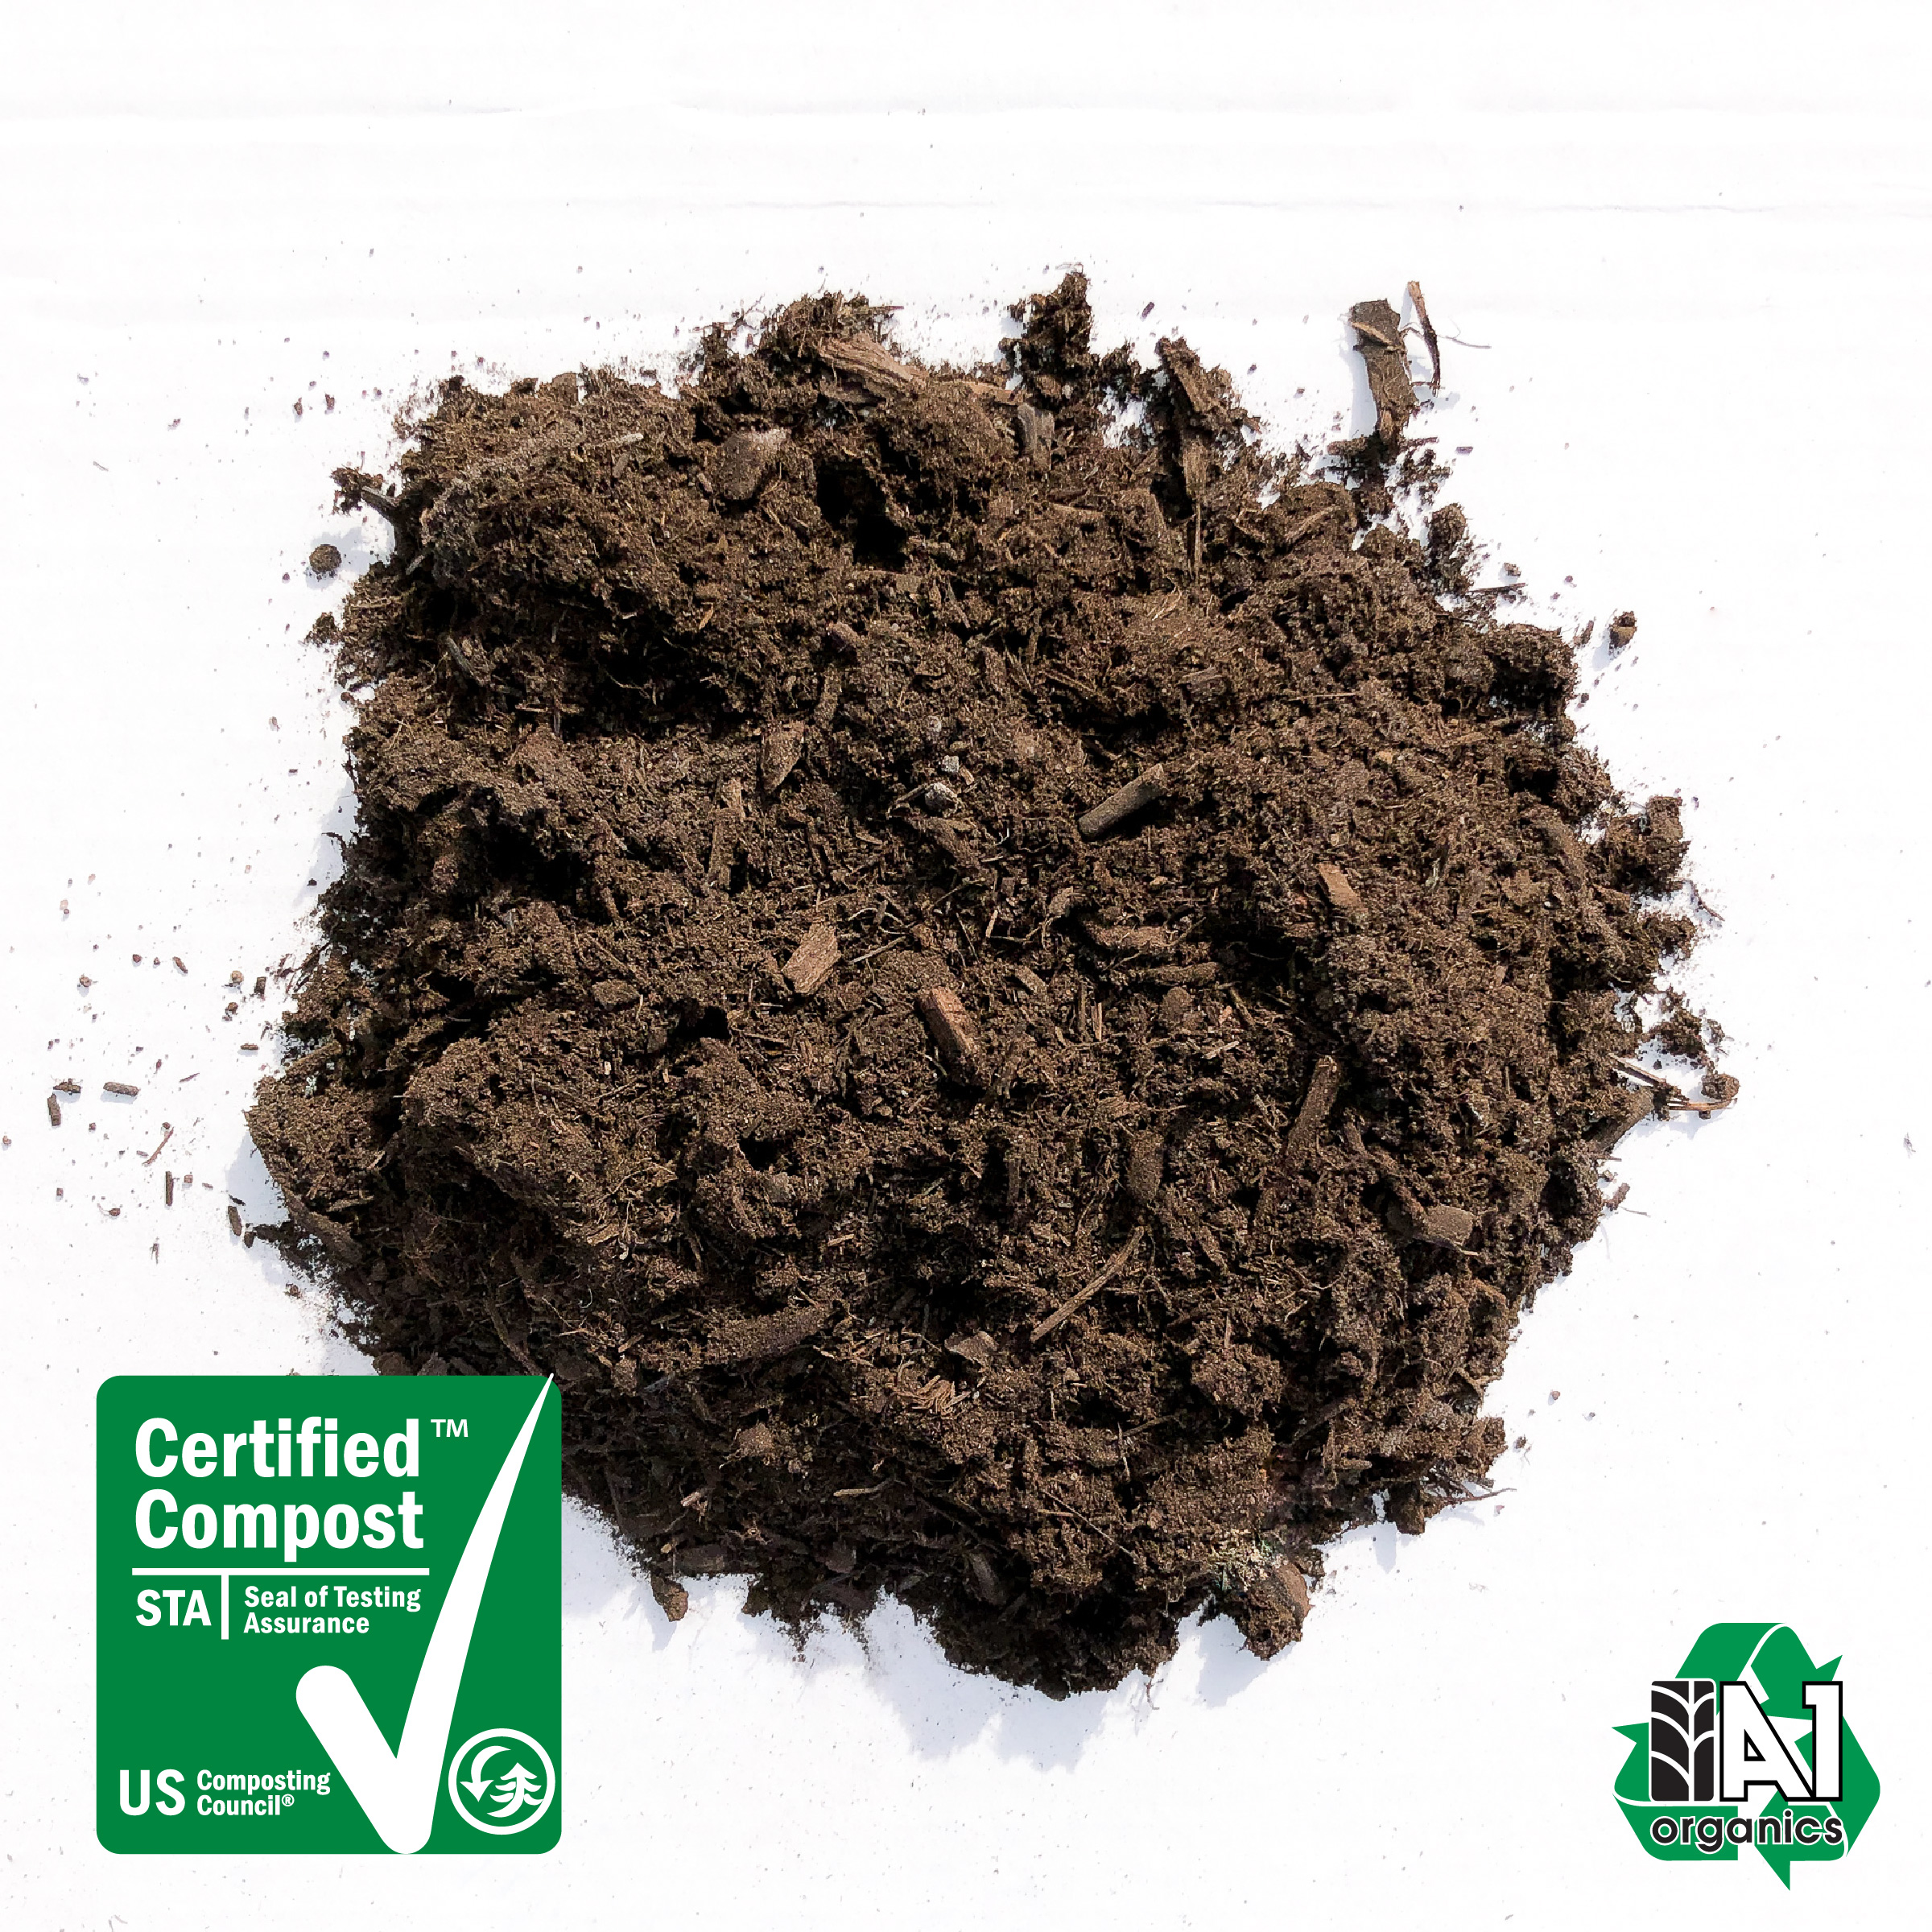 STA Certified Compost-02-01